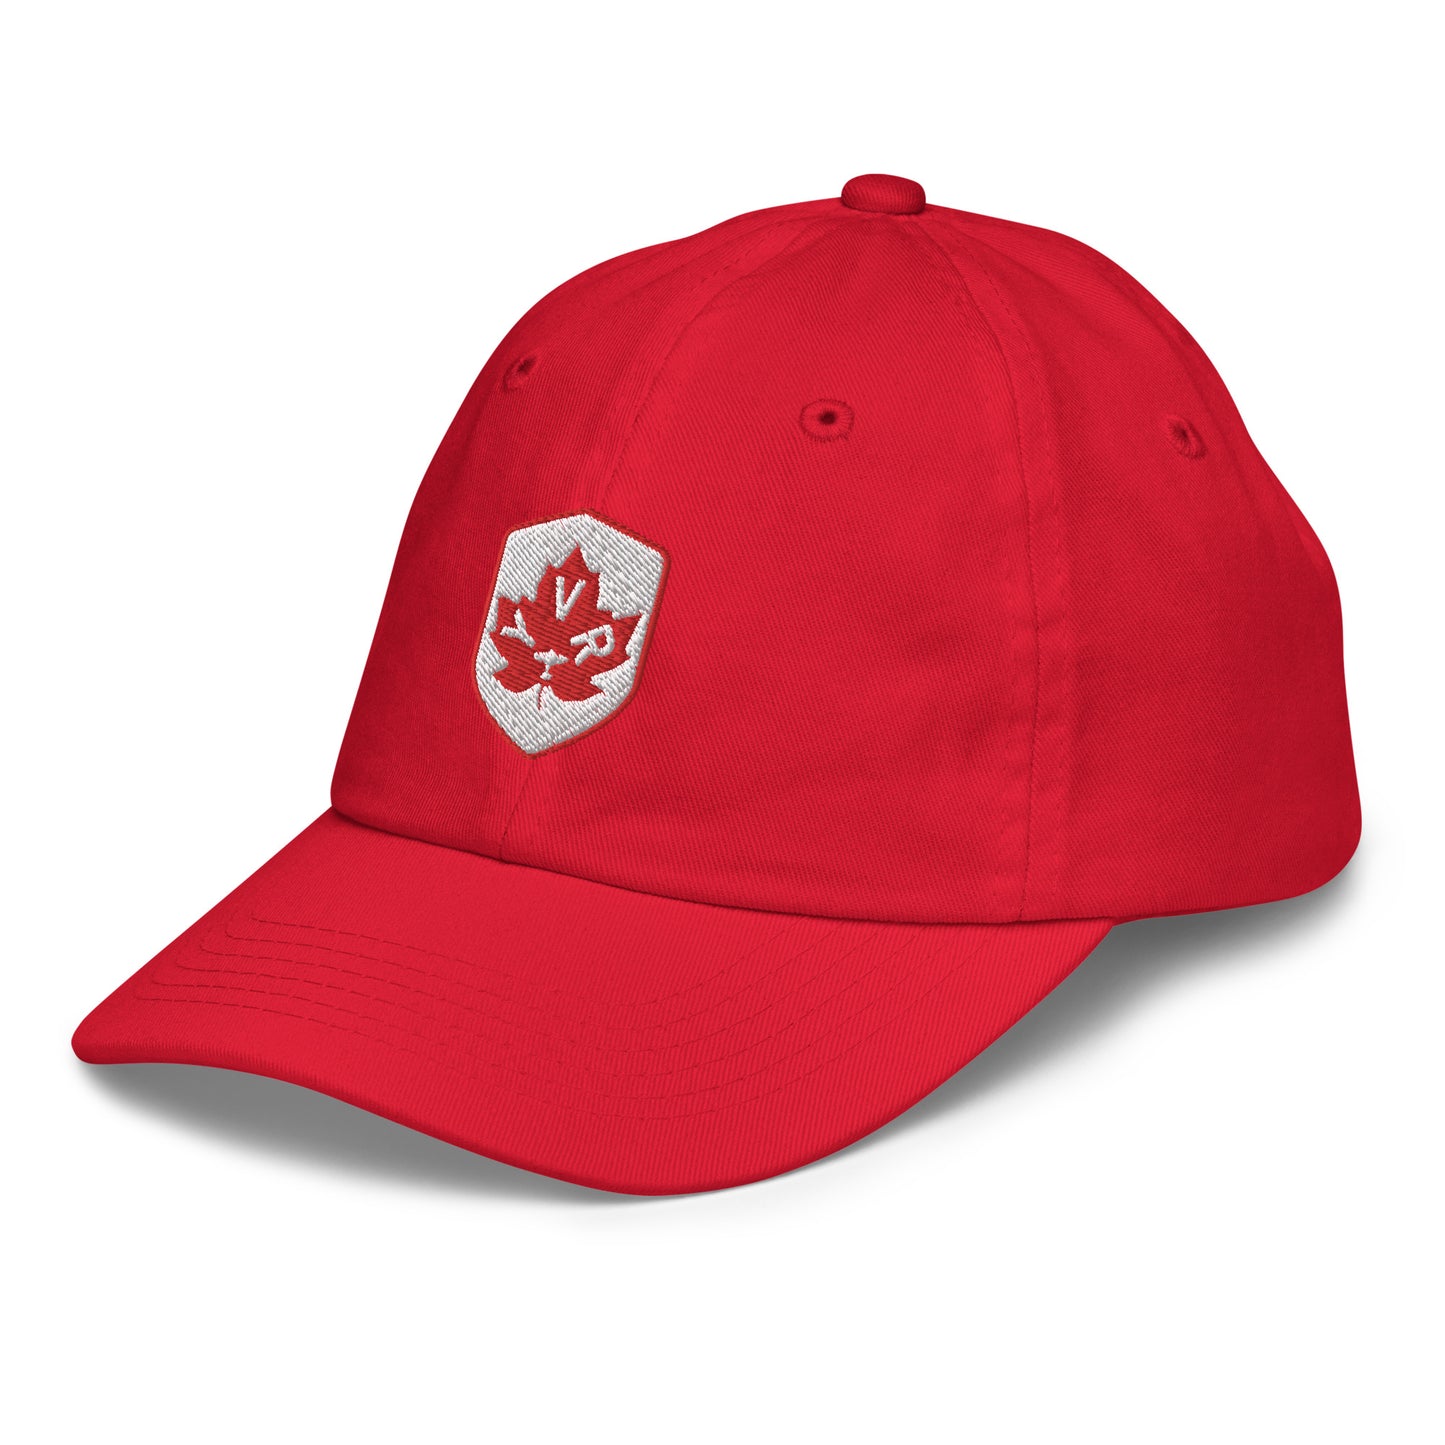 Maple Leaf Kid's Cap - Red/White • YVR Vancouver • YHM Designs - Image 17